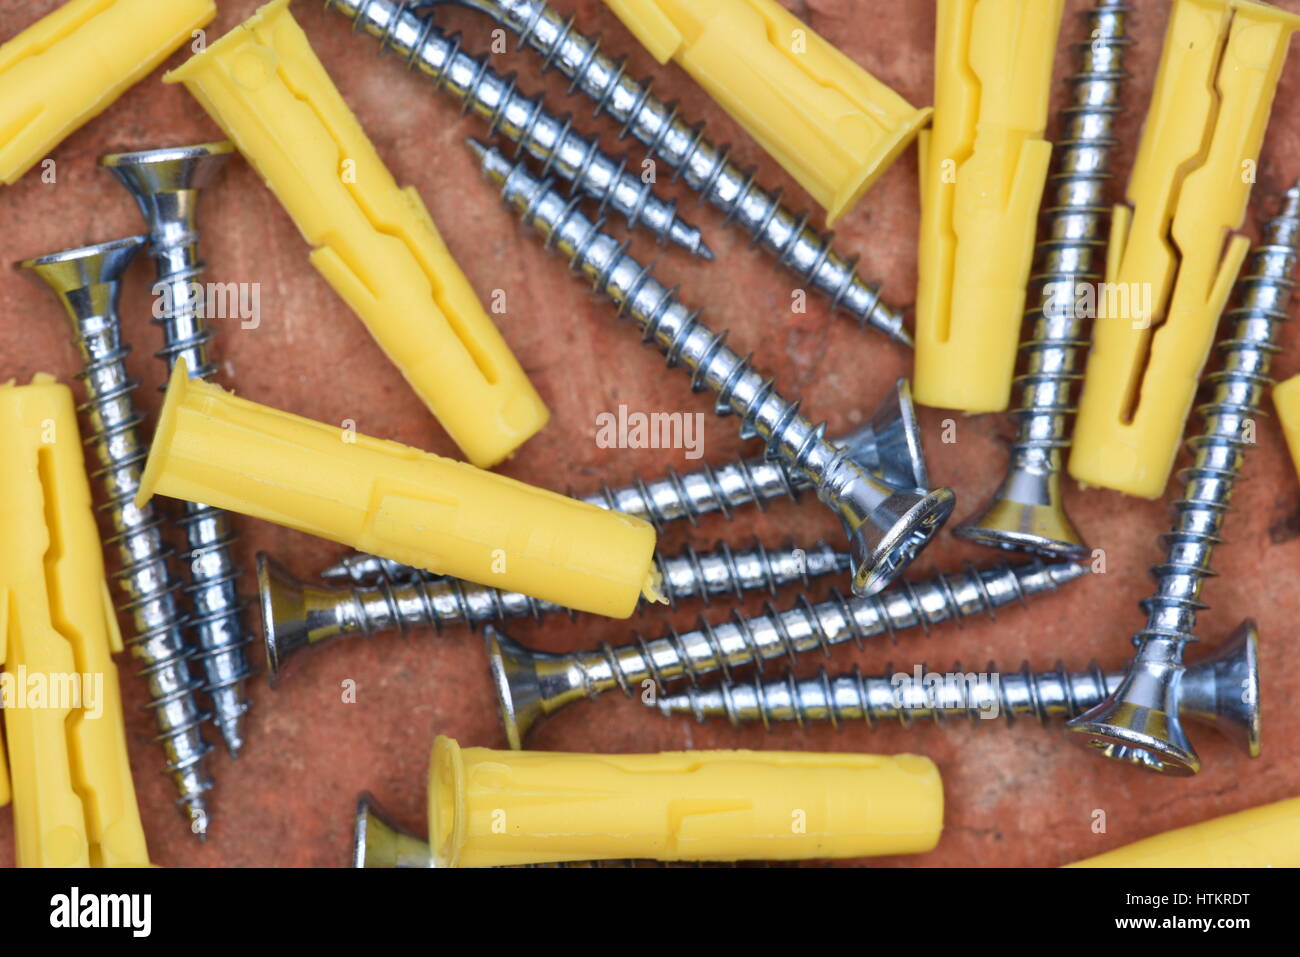 Plastic Dowels ans Screws on Red Brick Background Top View Stock Photo